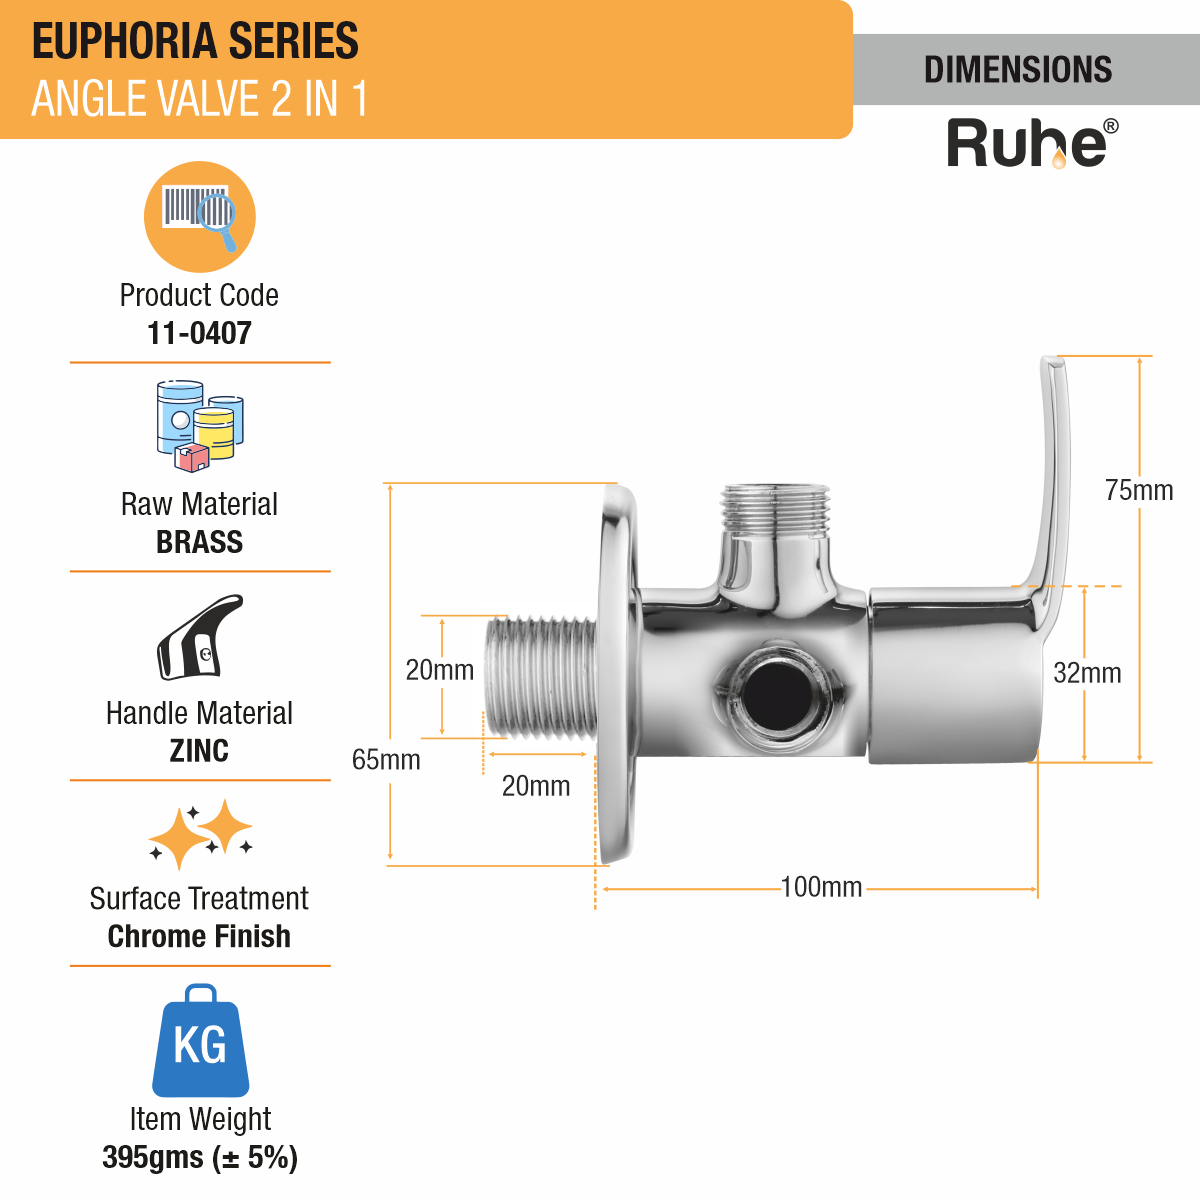 Euphoria Two Way Angle Valve Brass Faucet dimensions and size